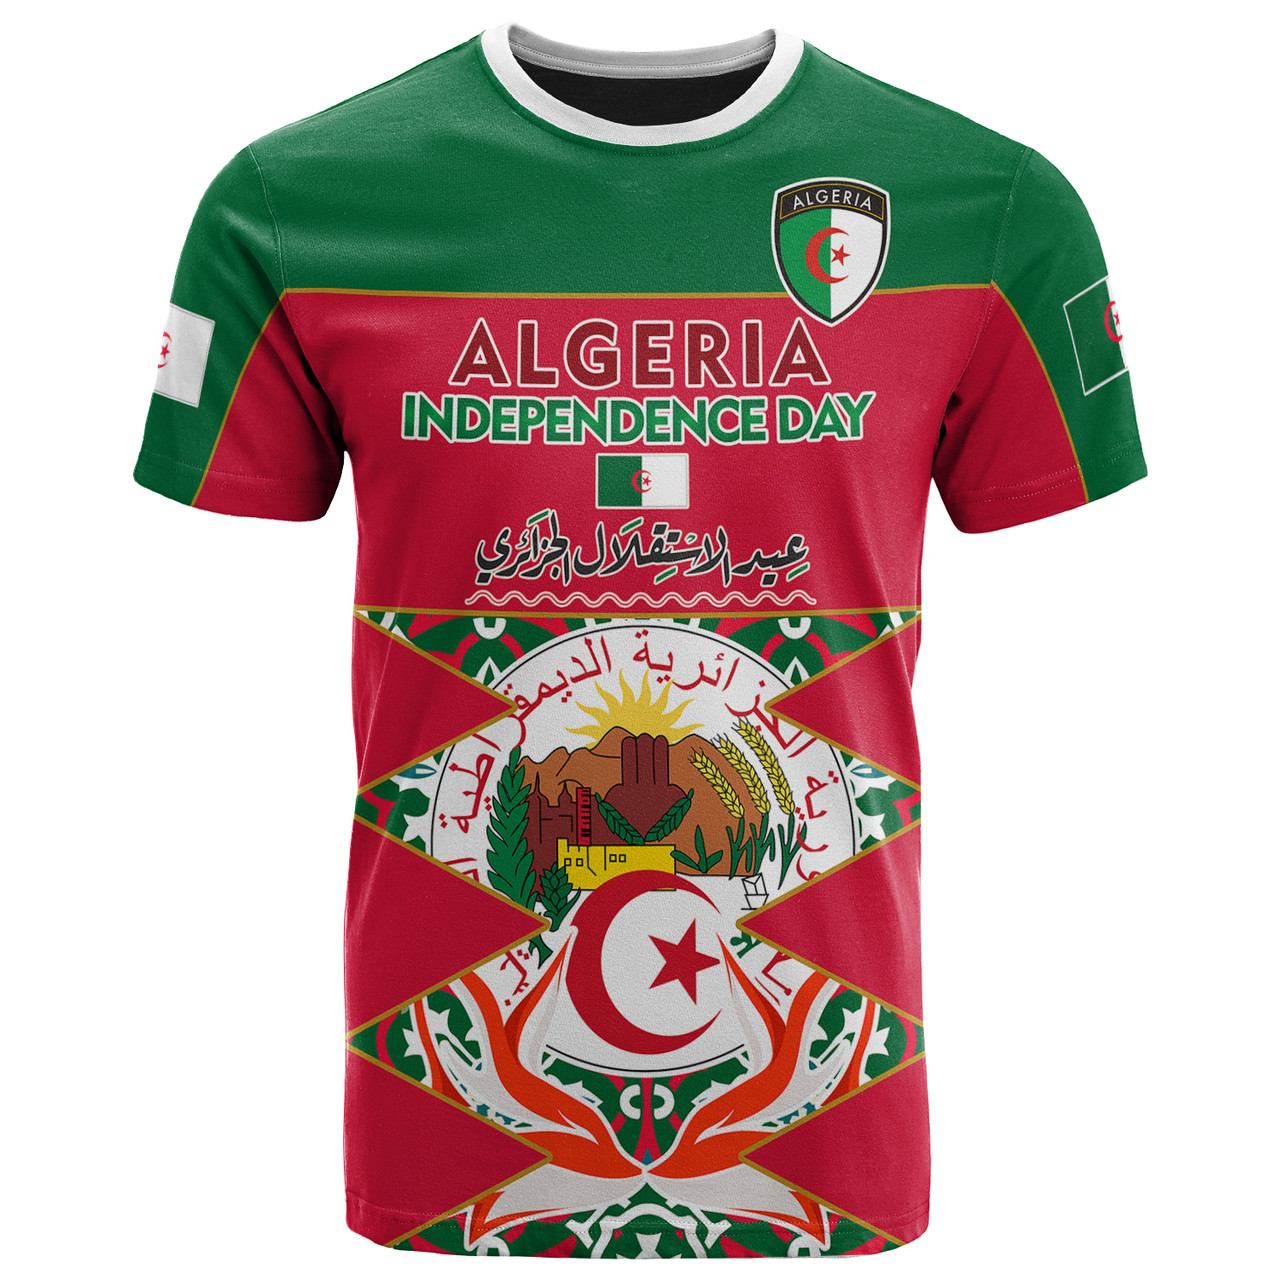 Algeria T-Shirt - Custom Algeria Independence Day With Fennec Fox And National Emblem T-Shirt